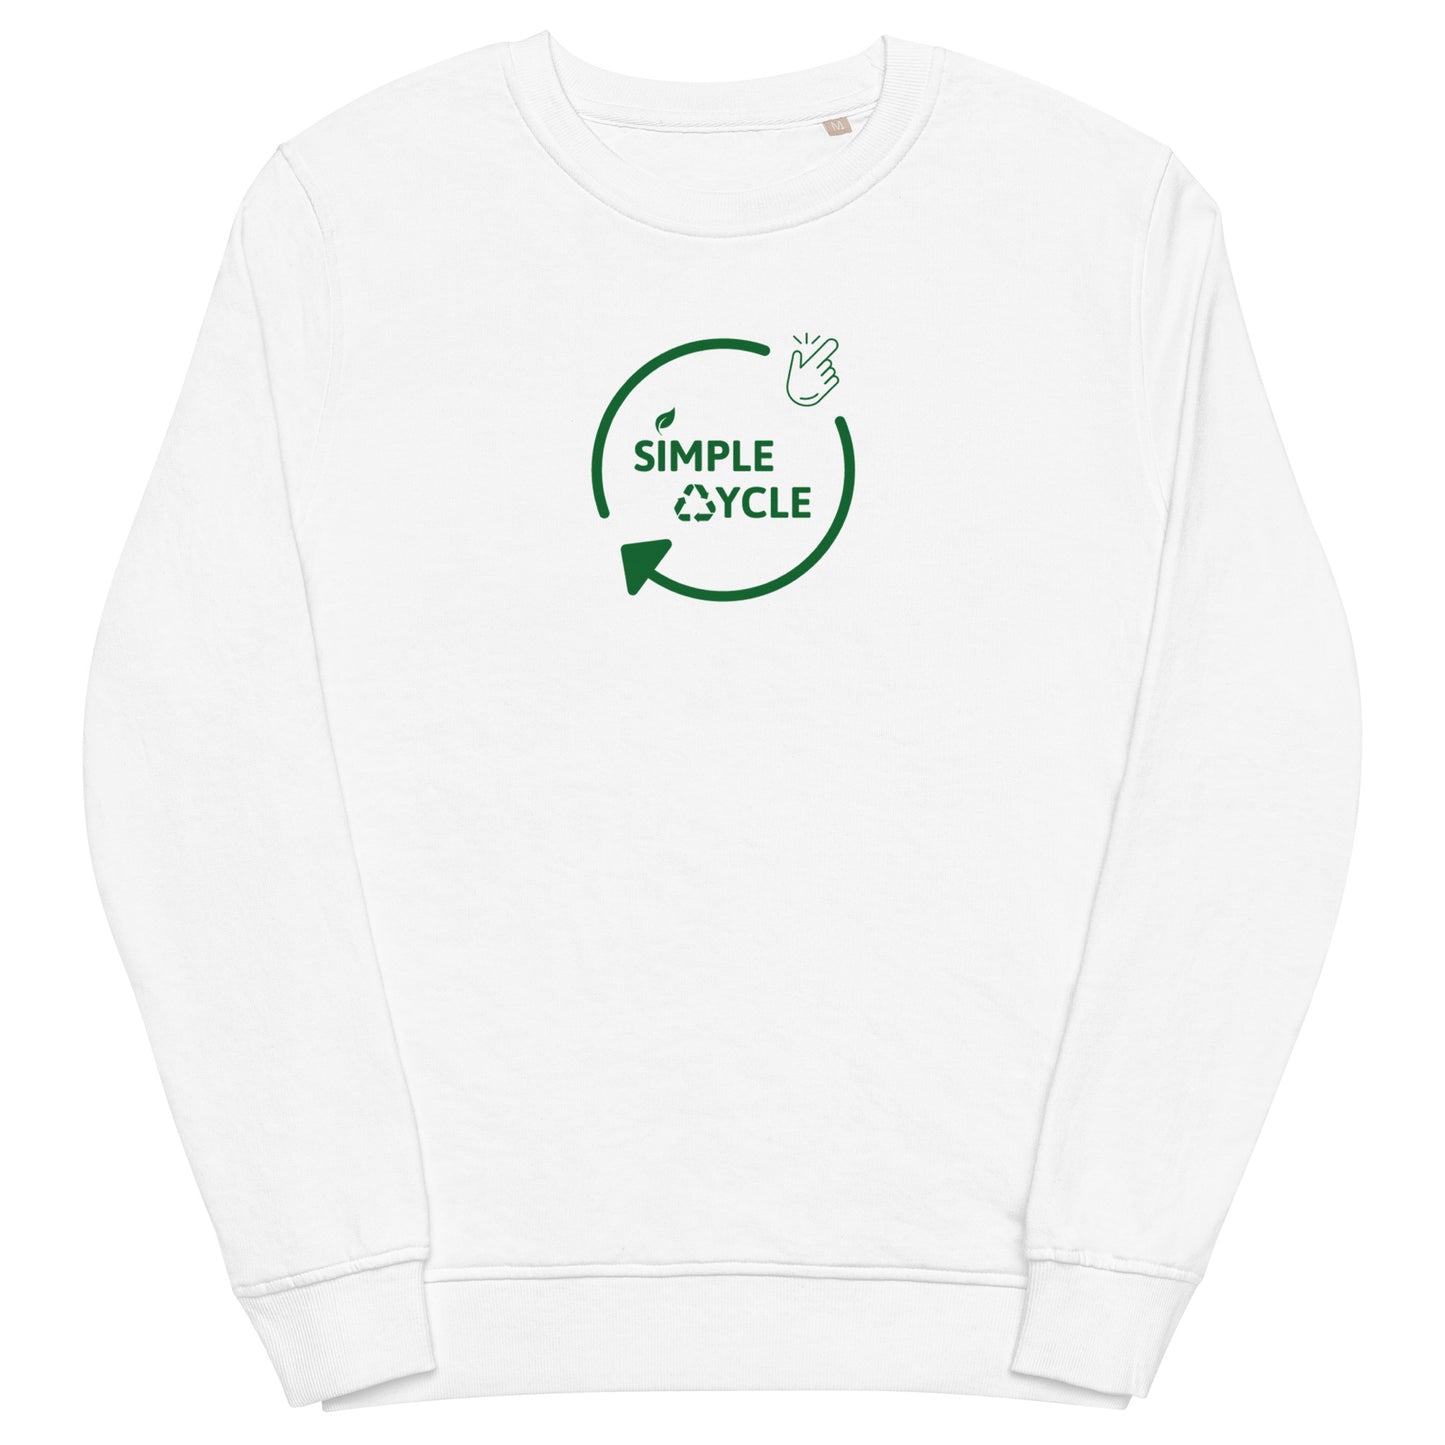 SimpleCycle Branded Unisex Organic Sweatshirt White front product only